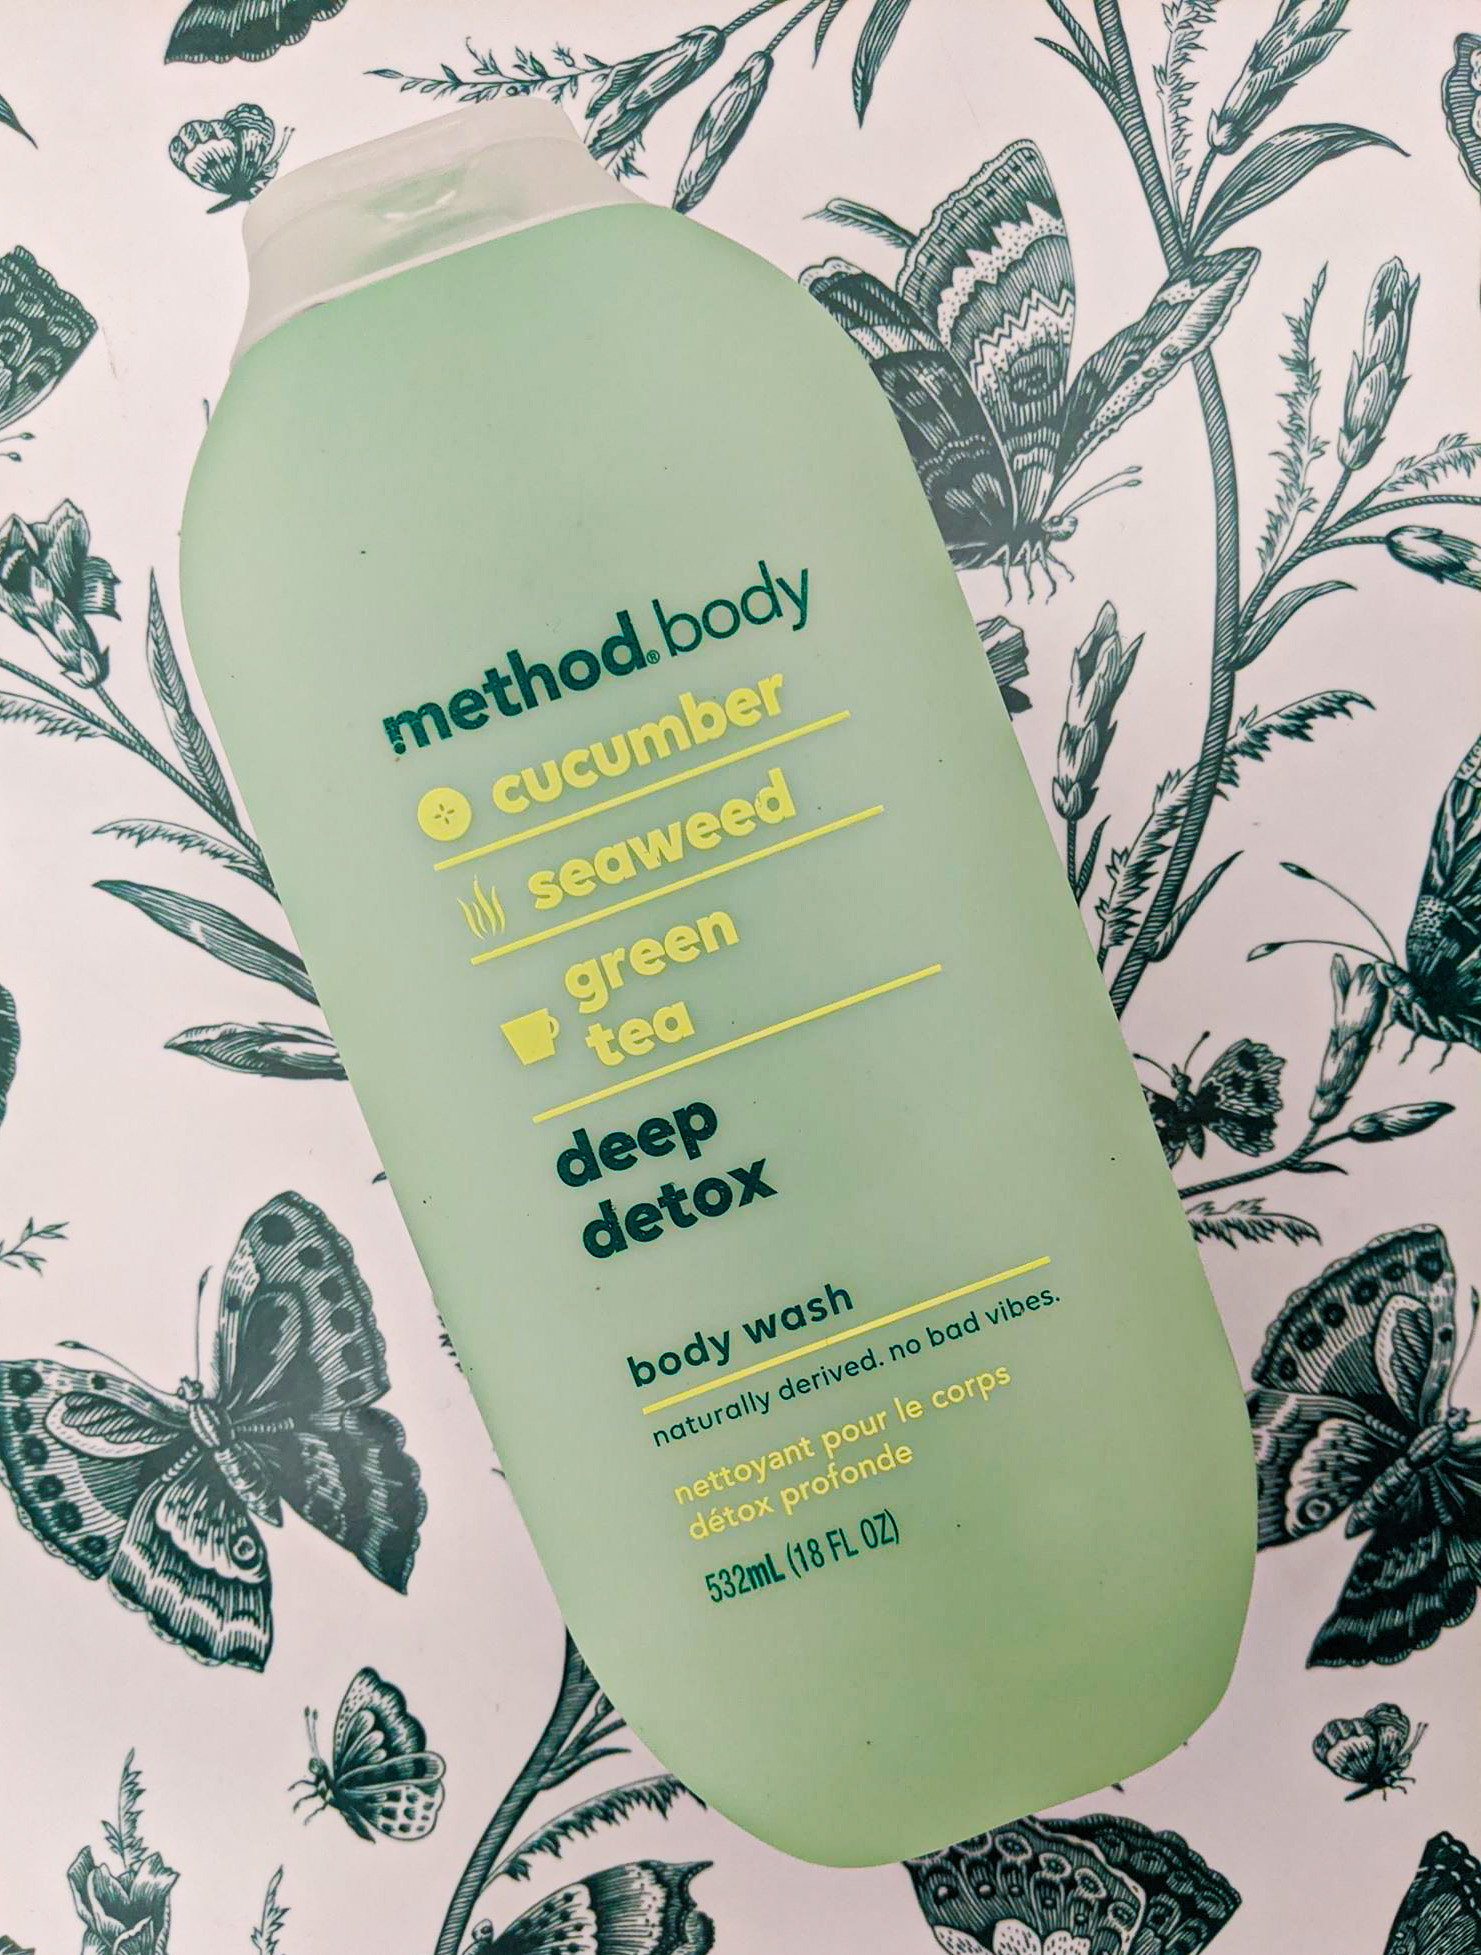 A flatlay of the bottle of body wash on a botanical-print background